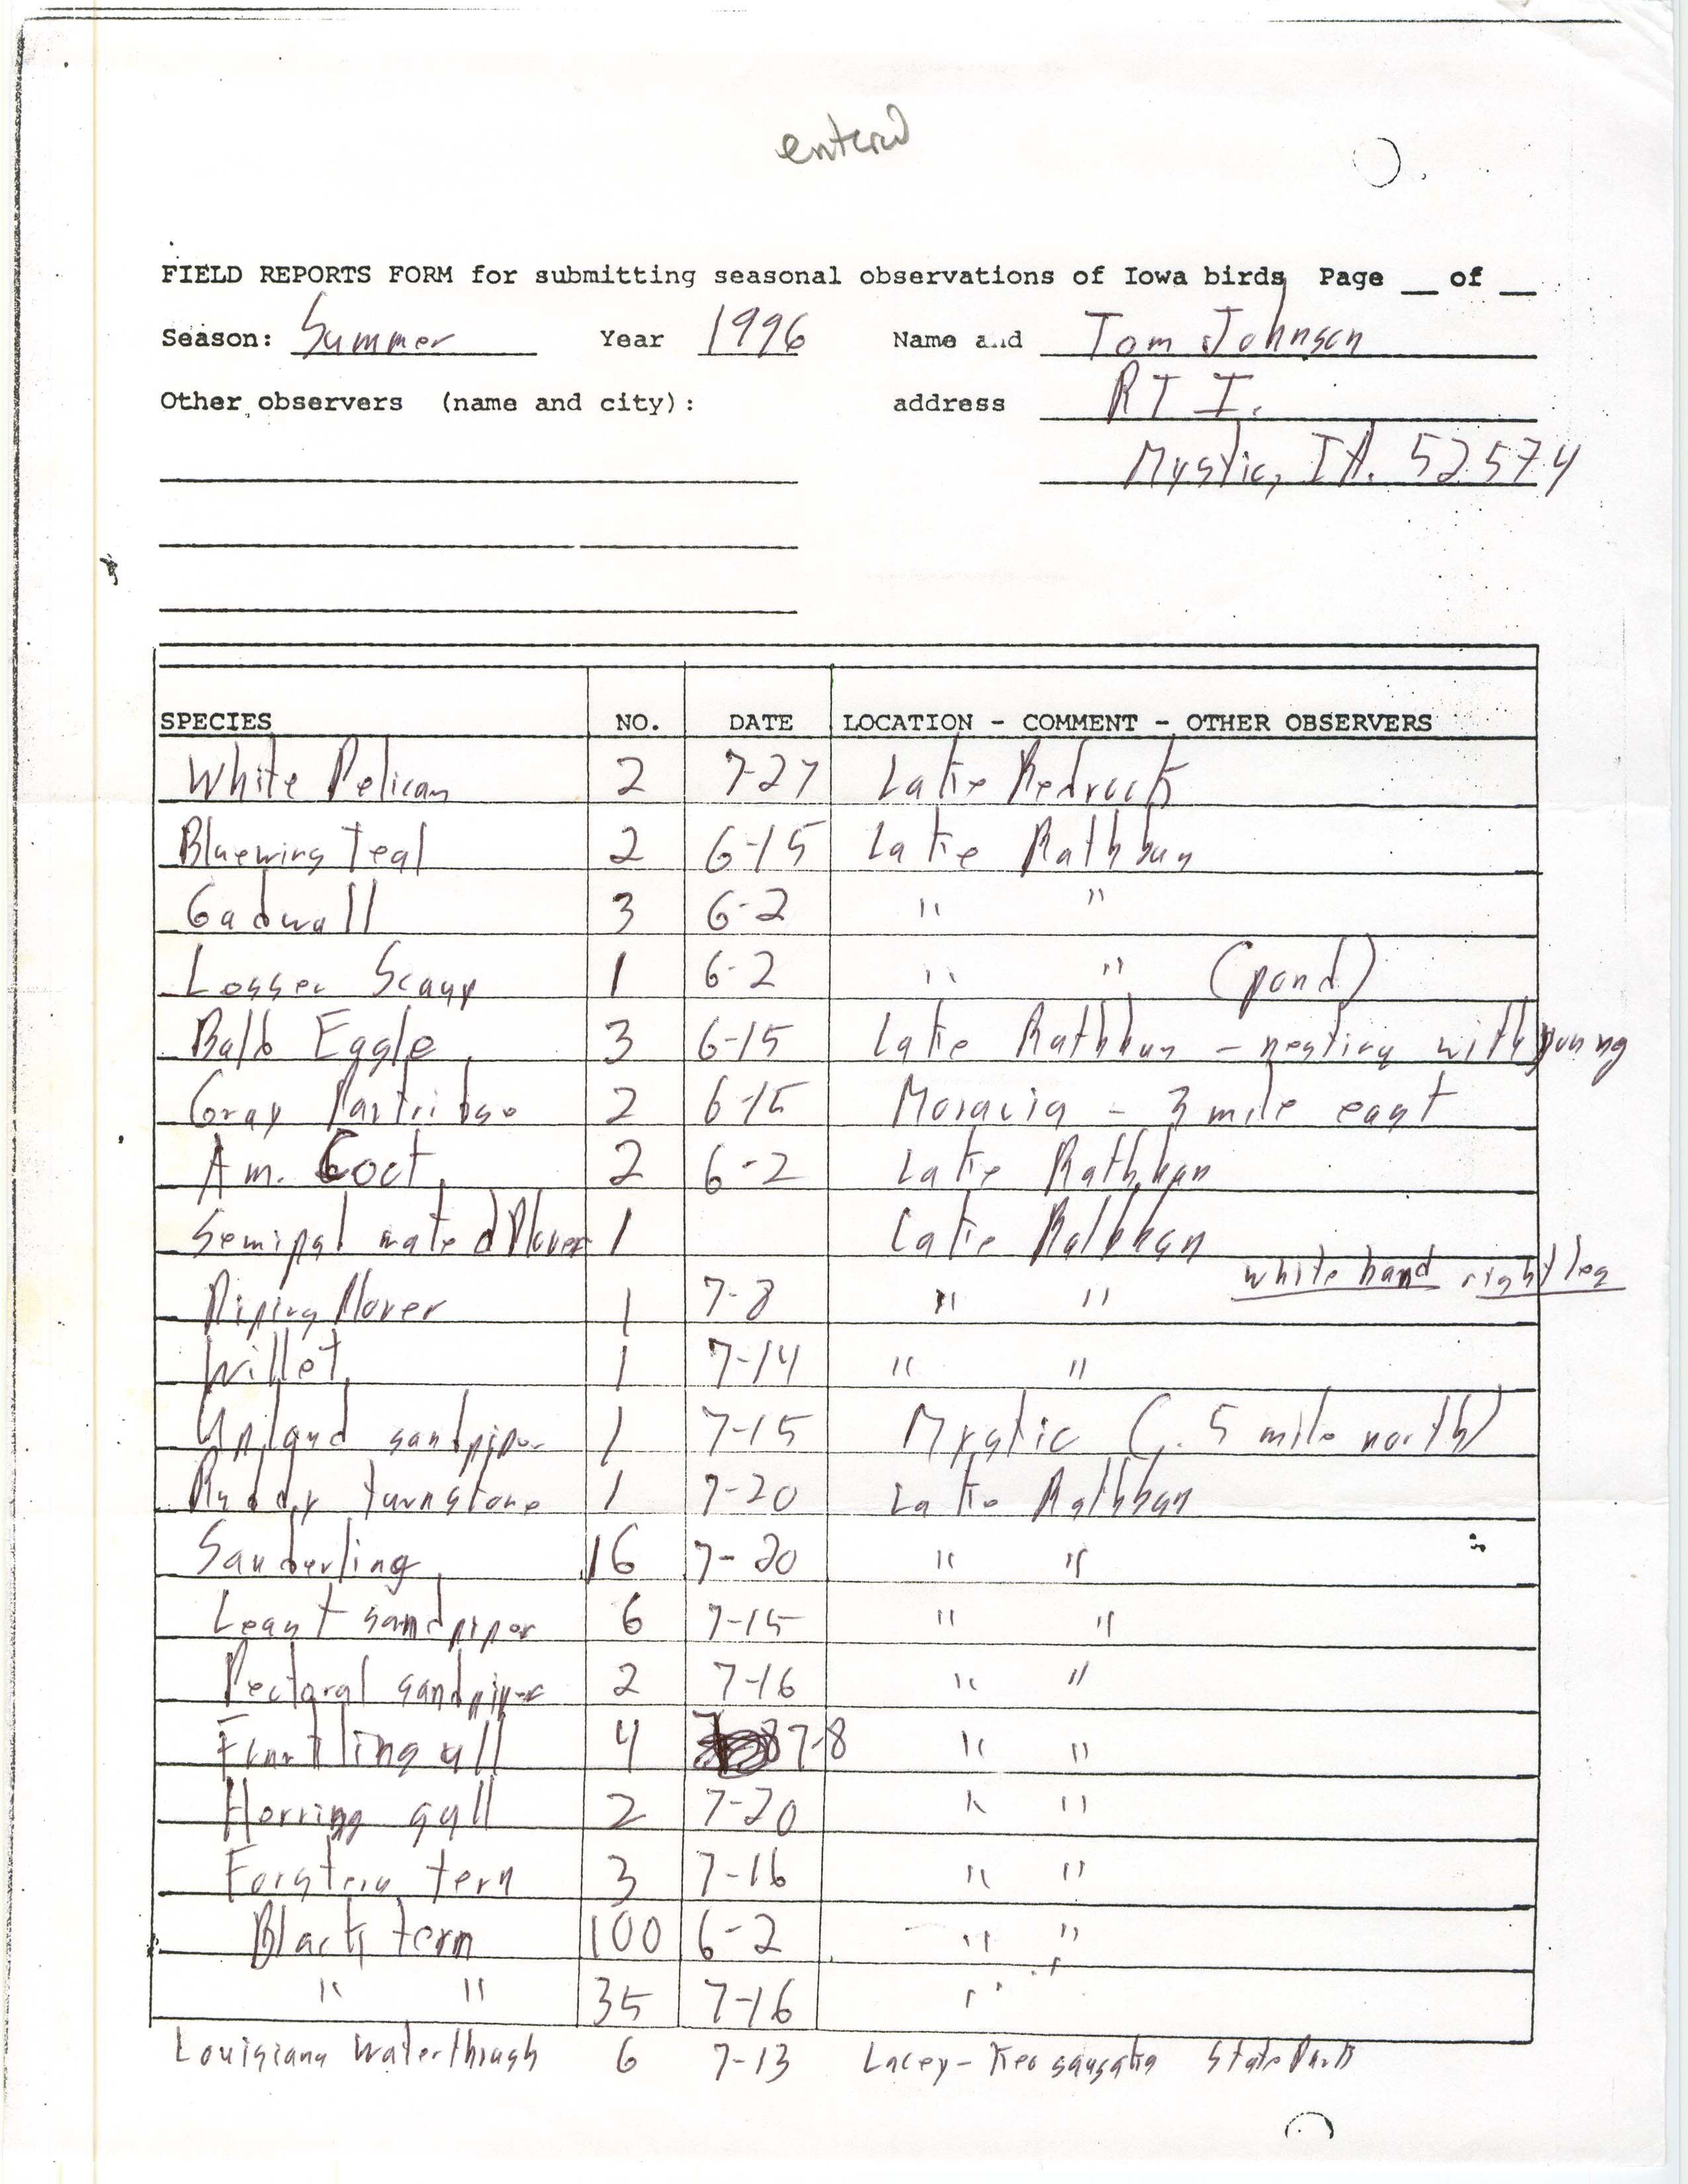 Field reports form for submitting seasonal observations of Iowa birds, Tom Johnson, summer 1996